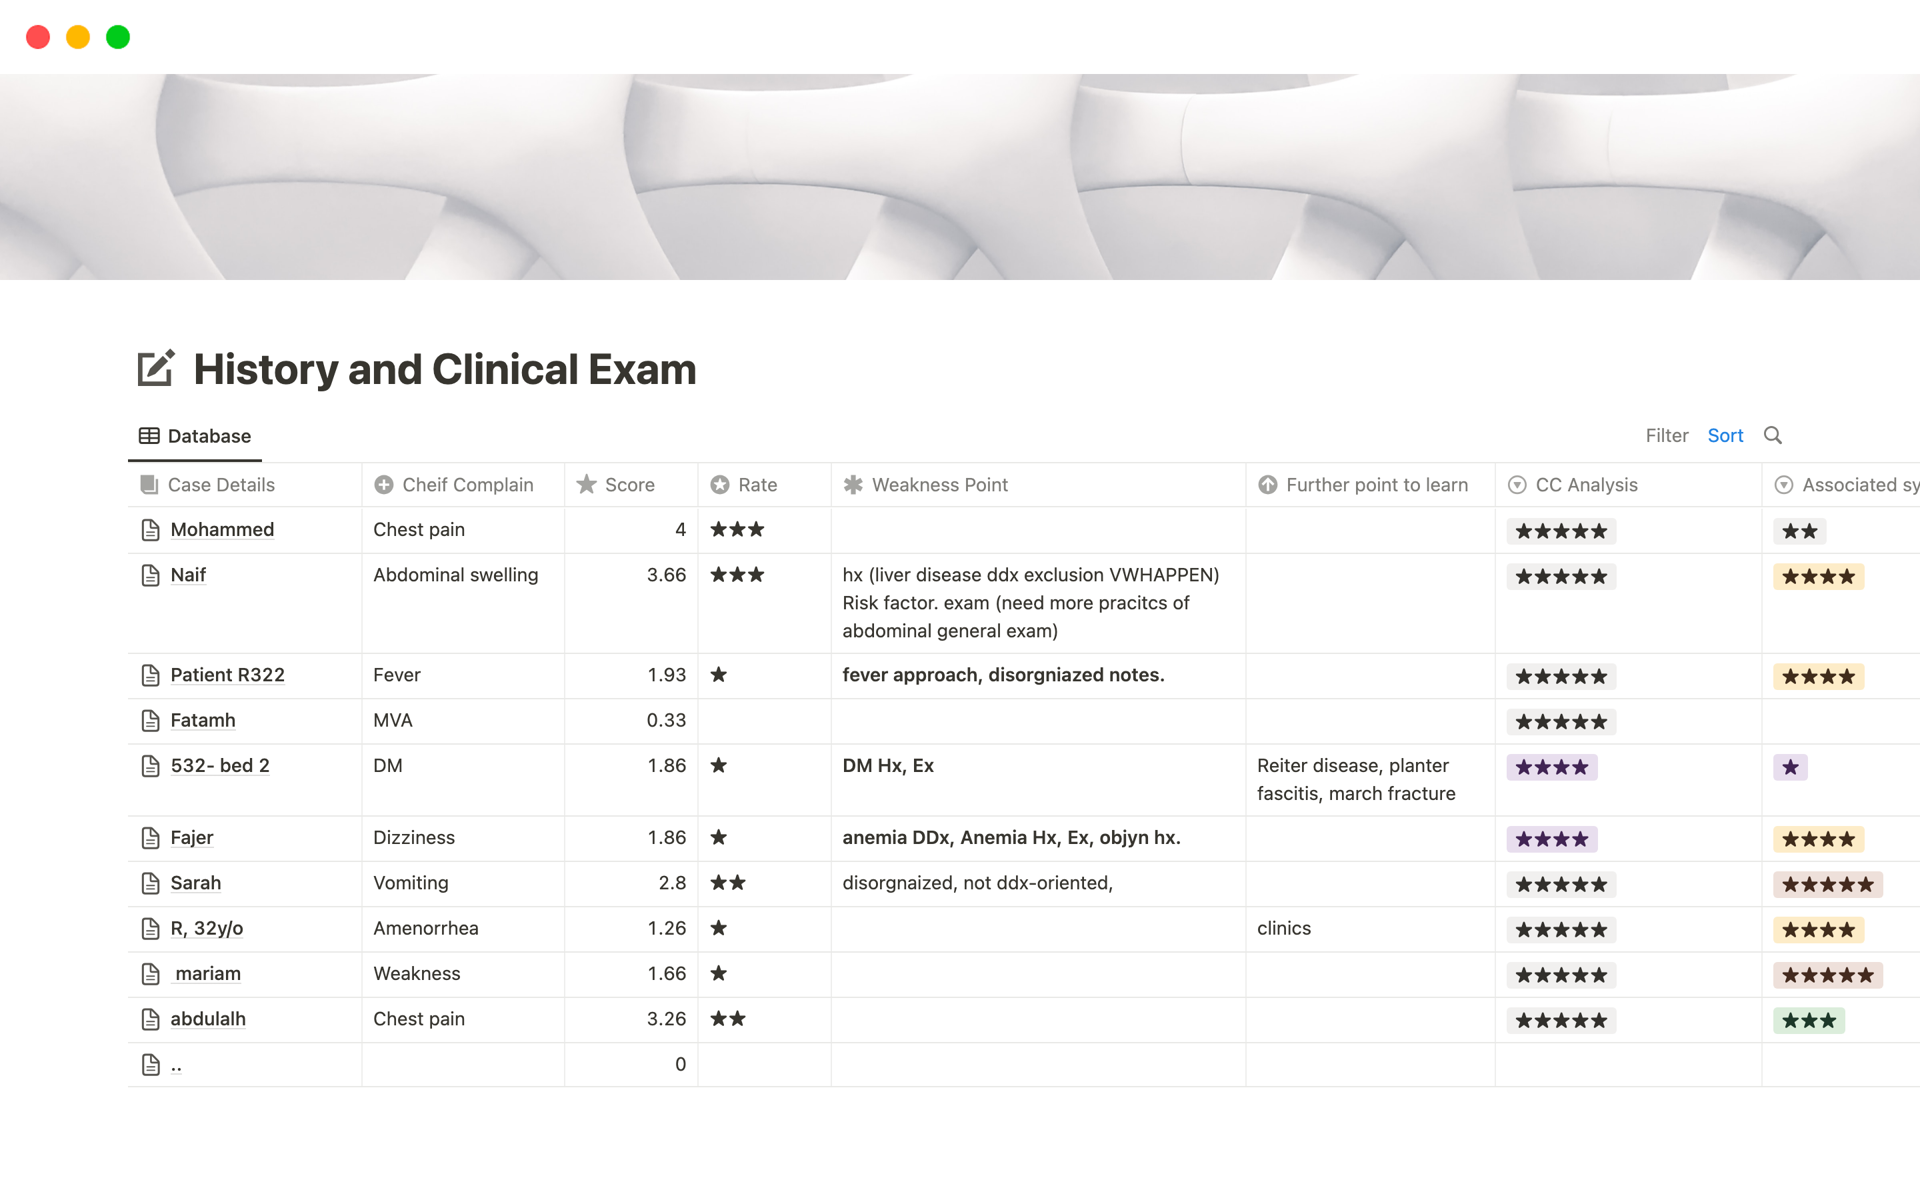 Our Notion template streamlines clinical examination notes and patient history for healthcare professionals with a user-friendly Scoring System template.

